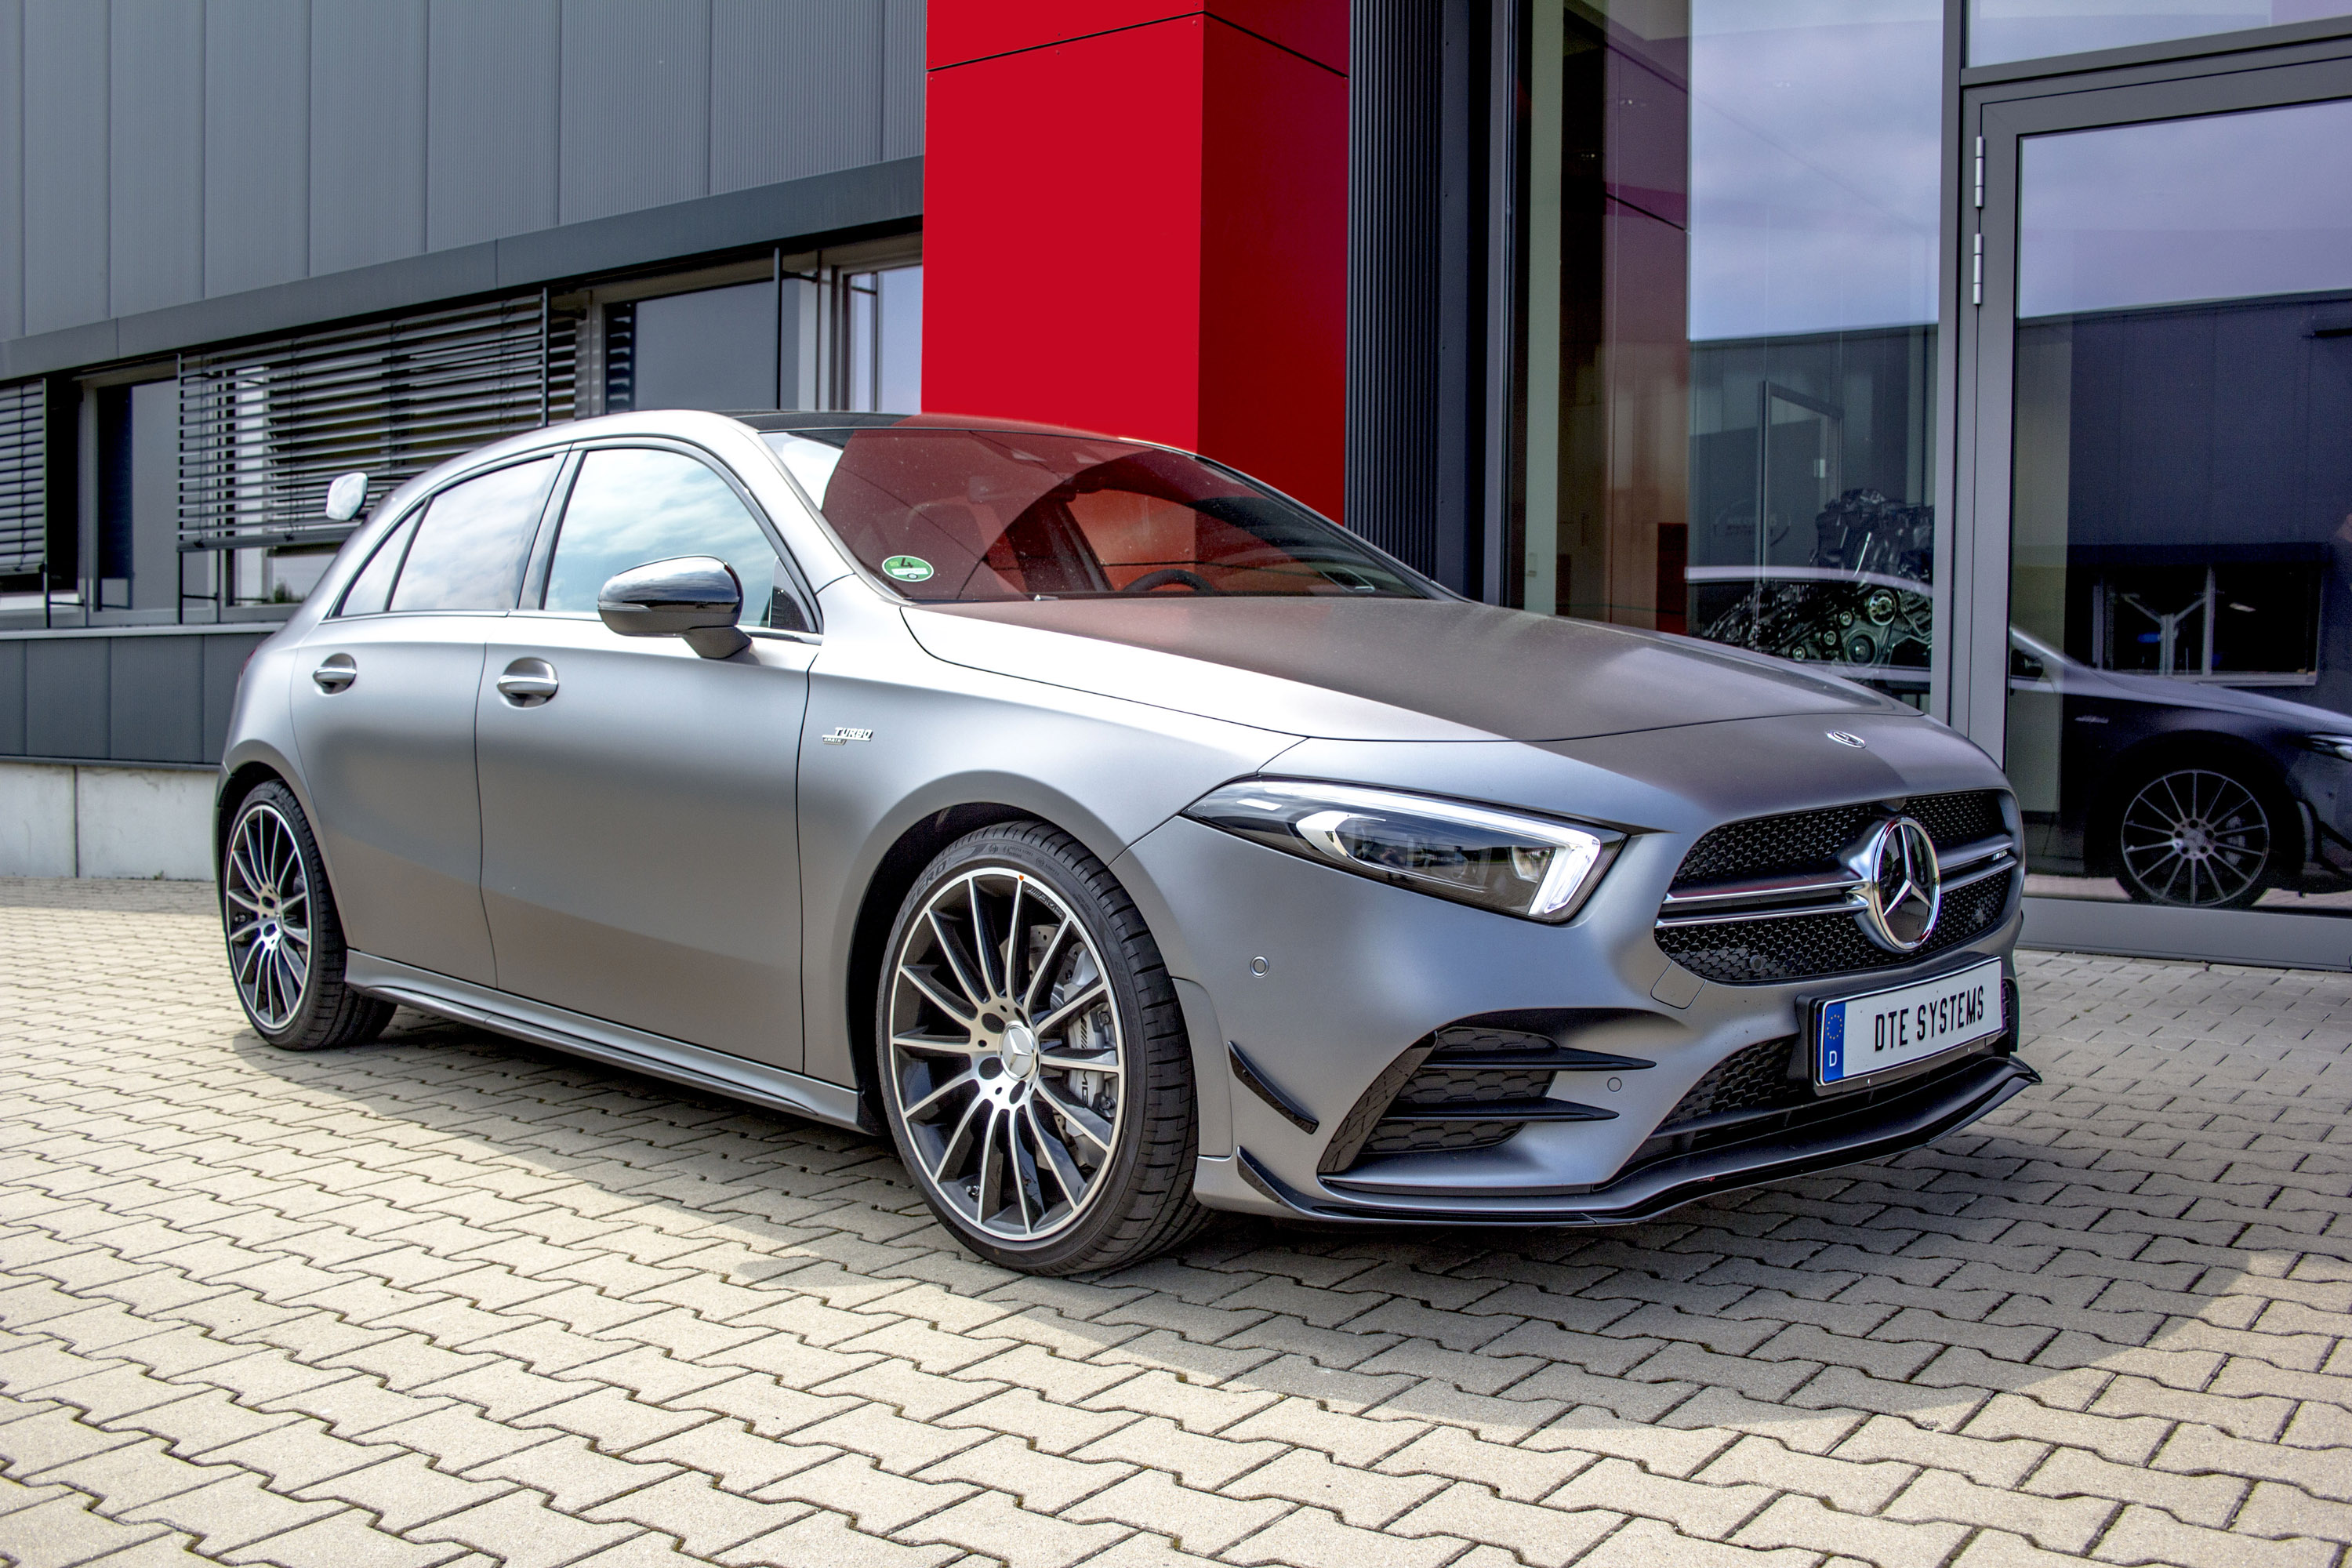 DTE Systems Mercedes-AMG A45